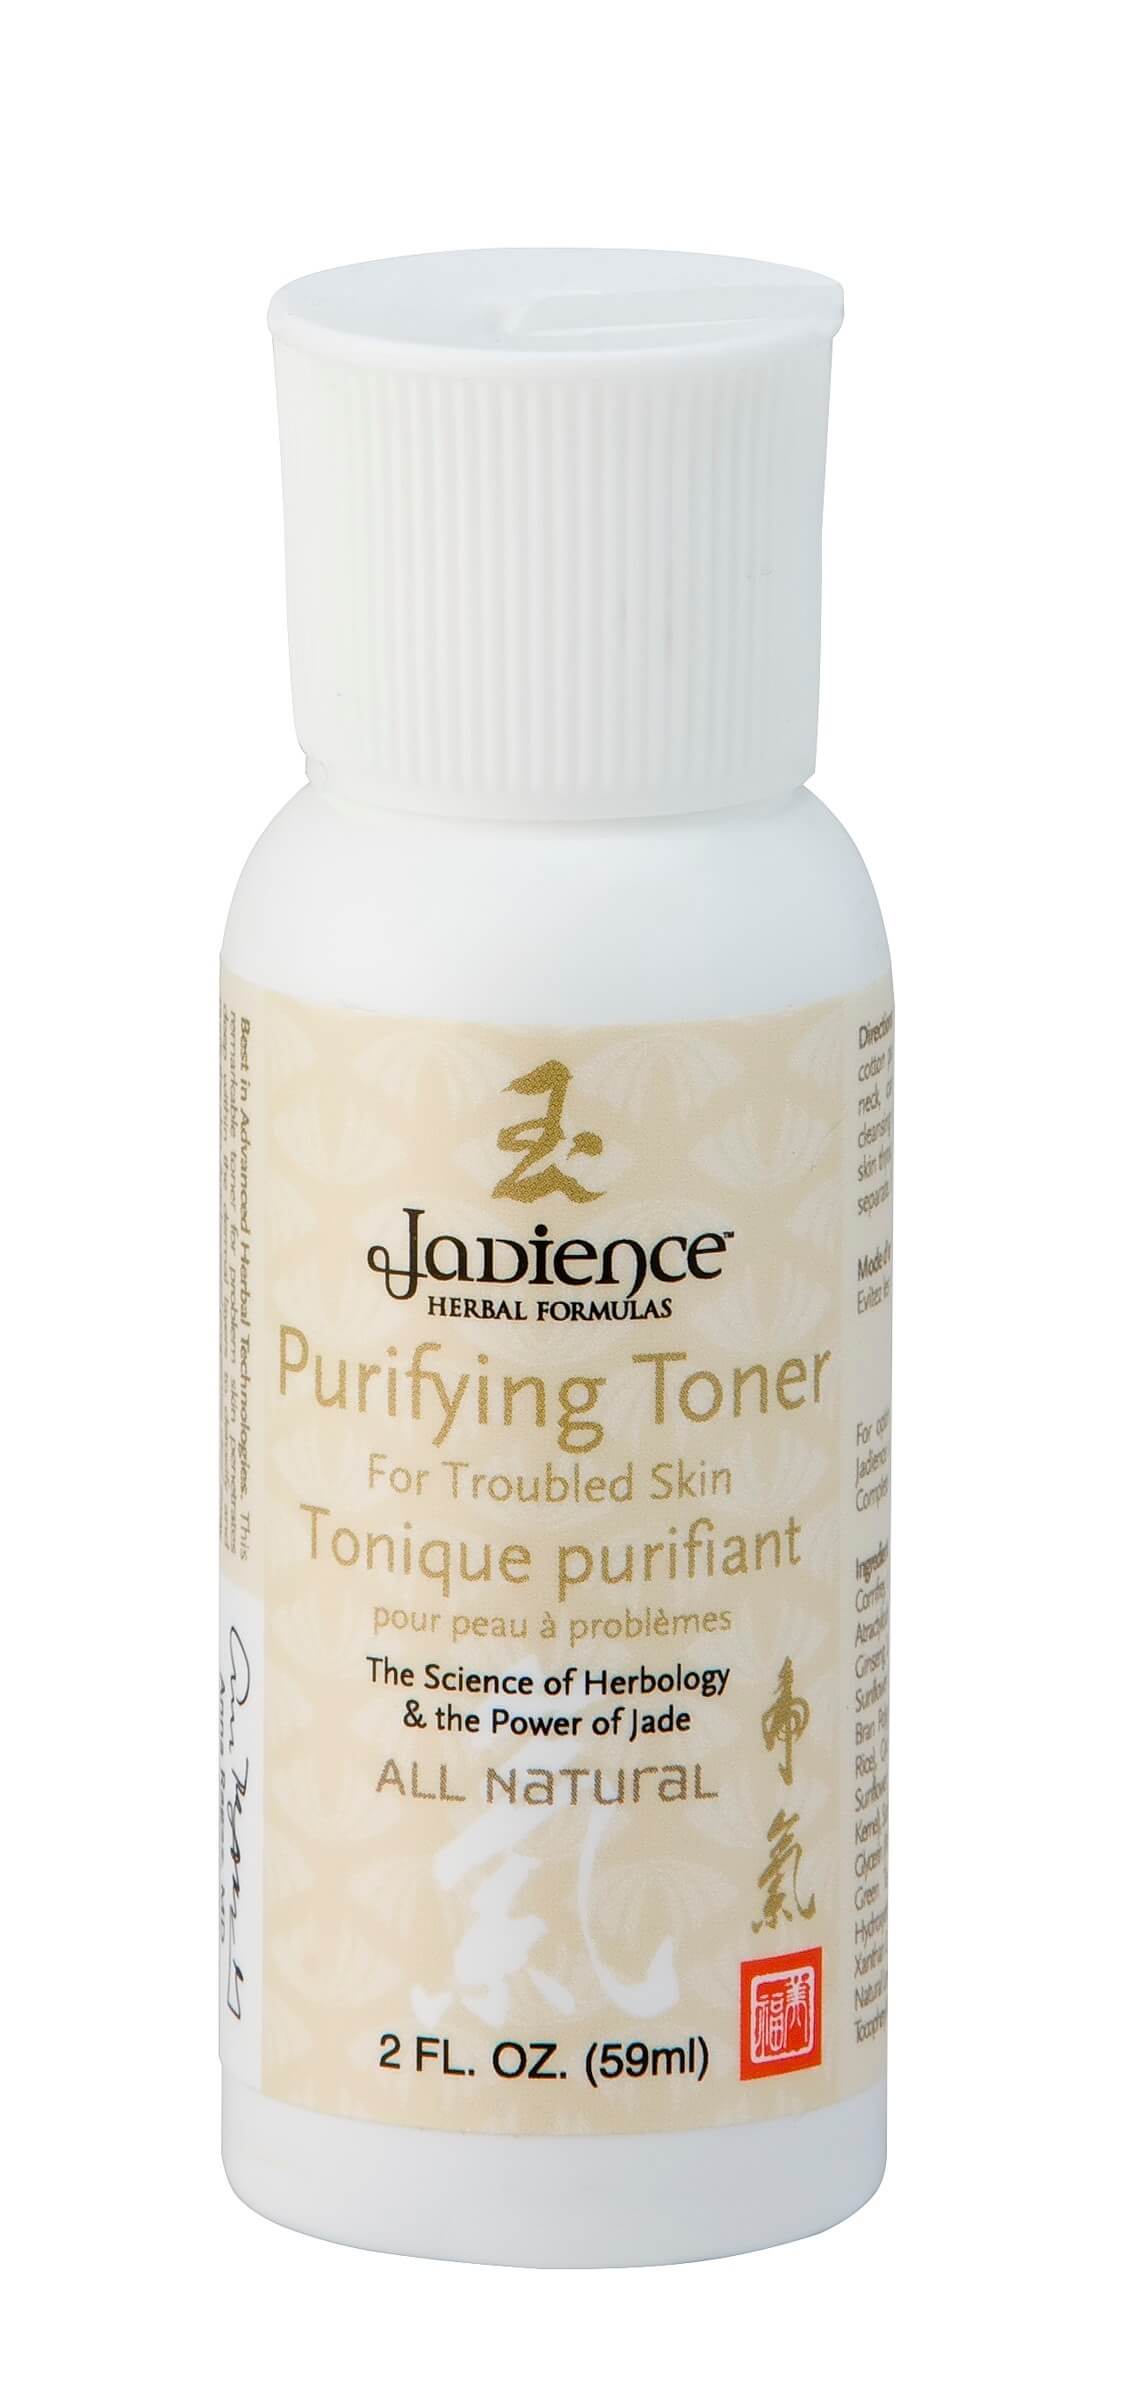 Purifying Toner – for troubled skin